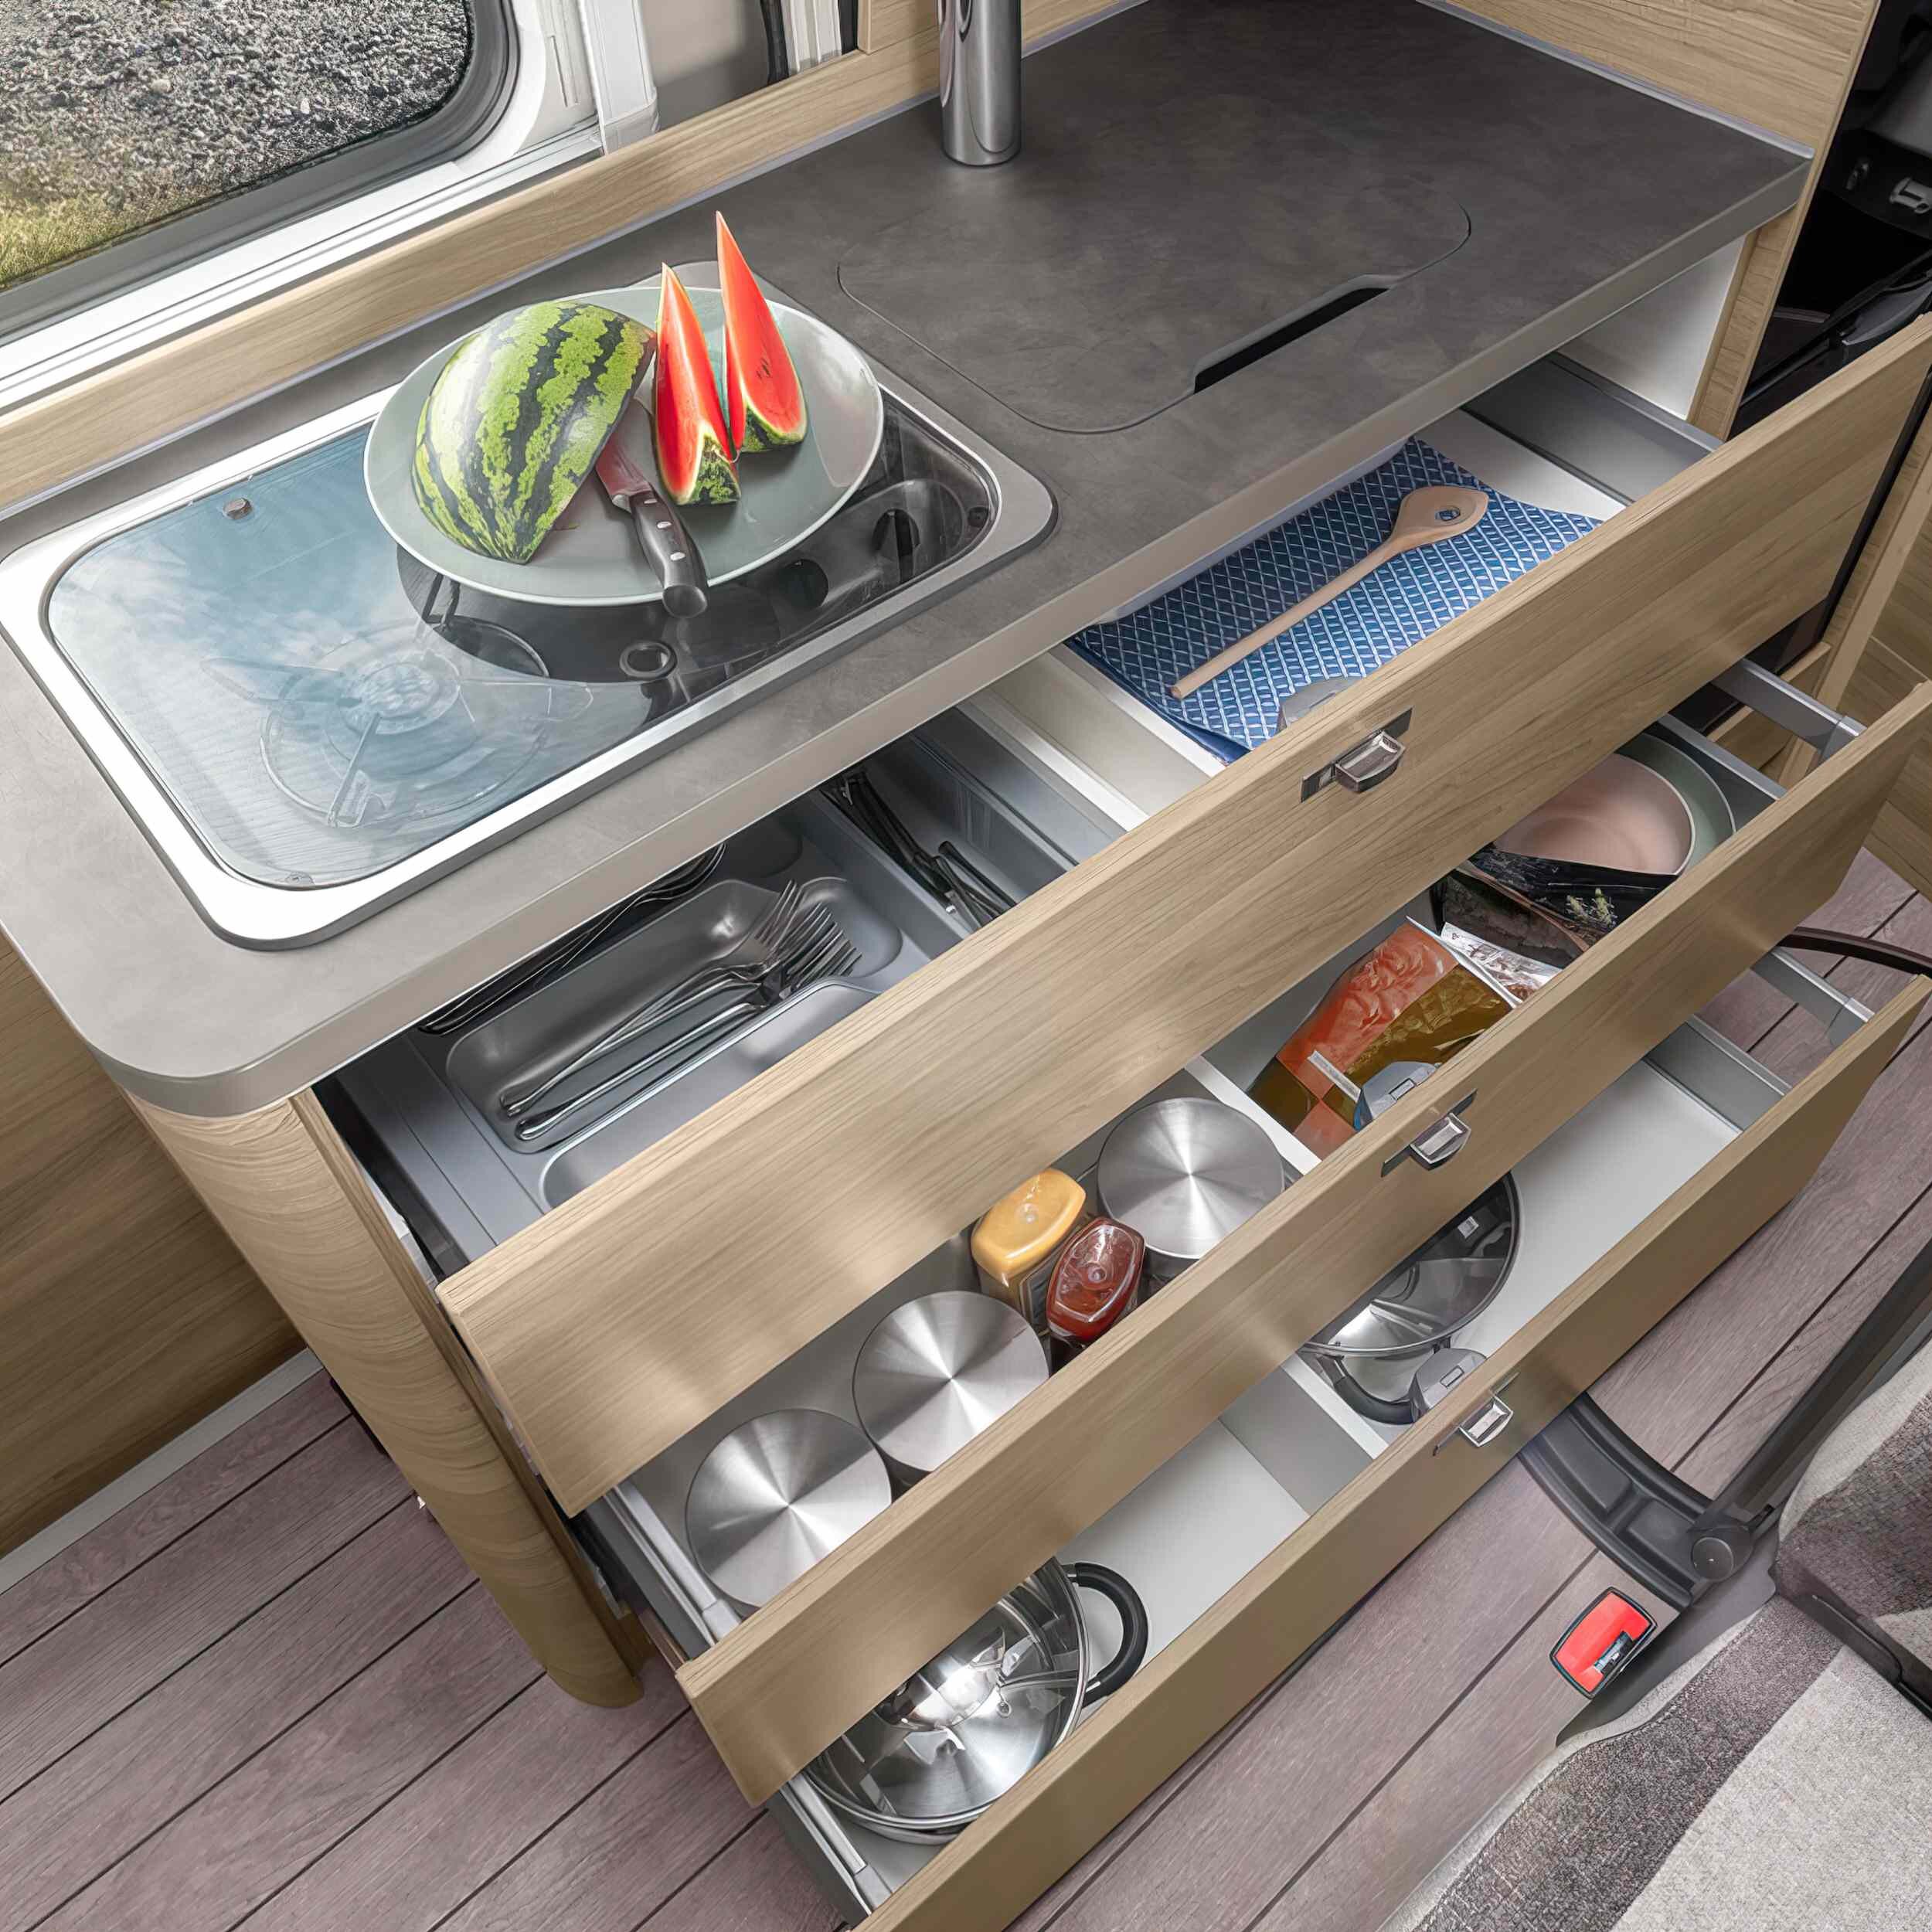  Want more sleeping space and less storage? The Boxlife has you covered. 